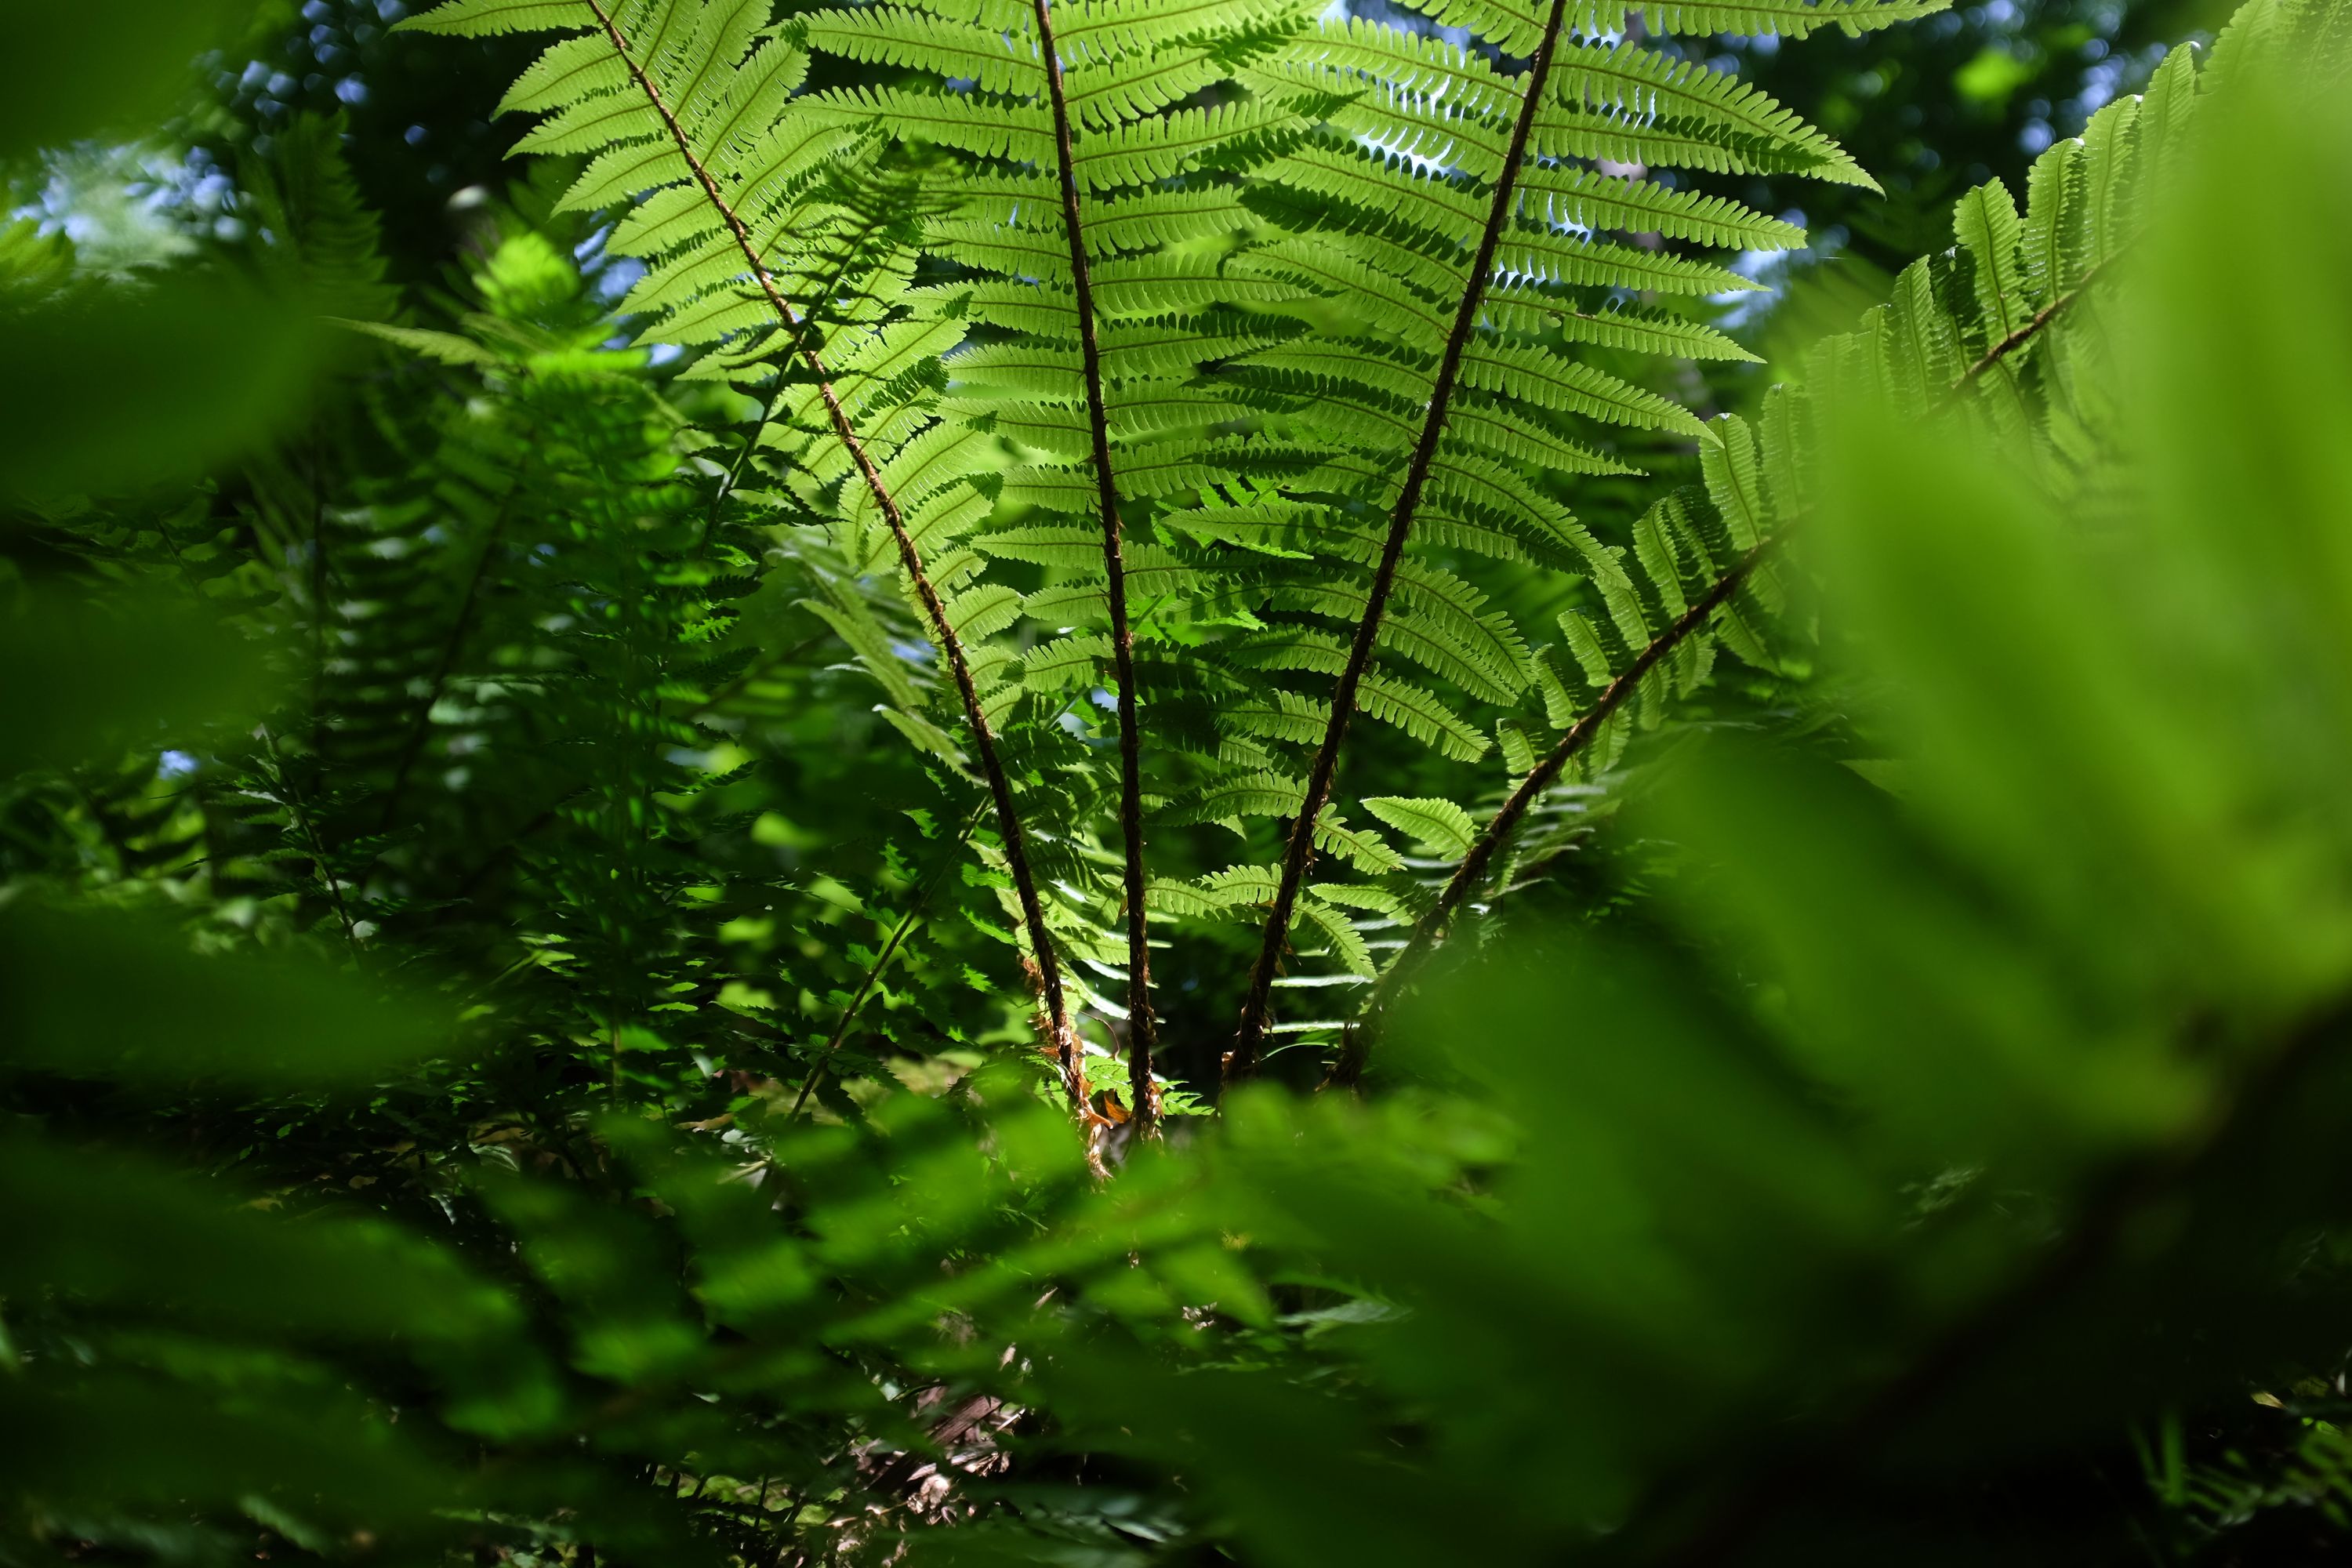 Fronds of a fern backlit by the sun.